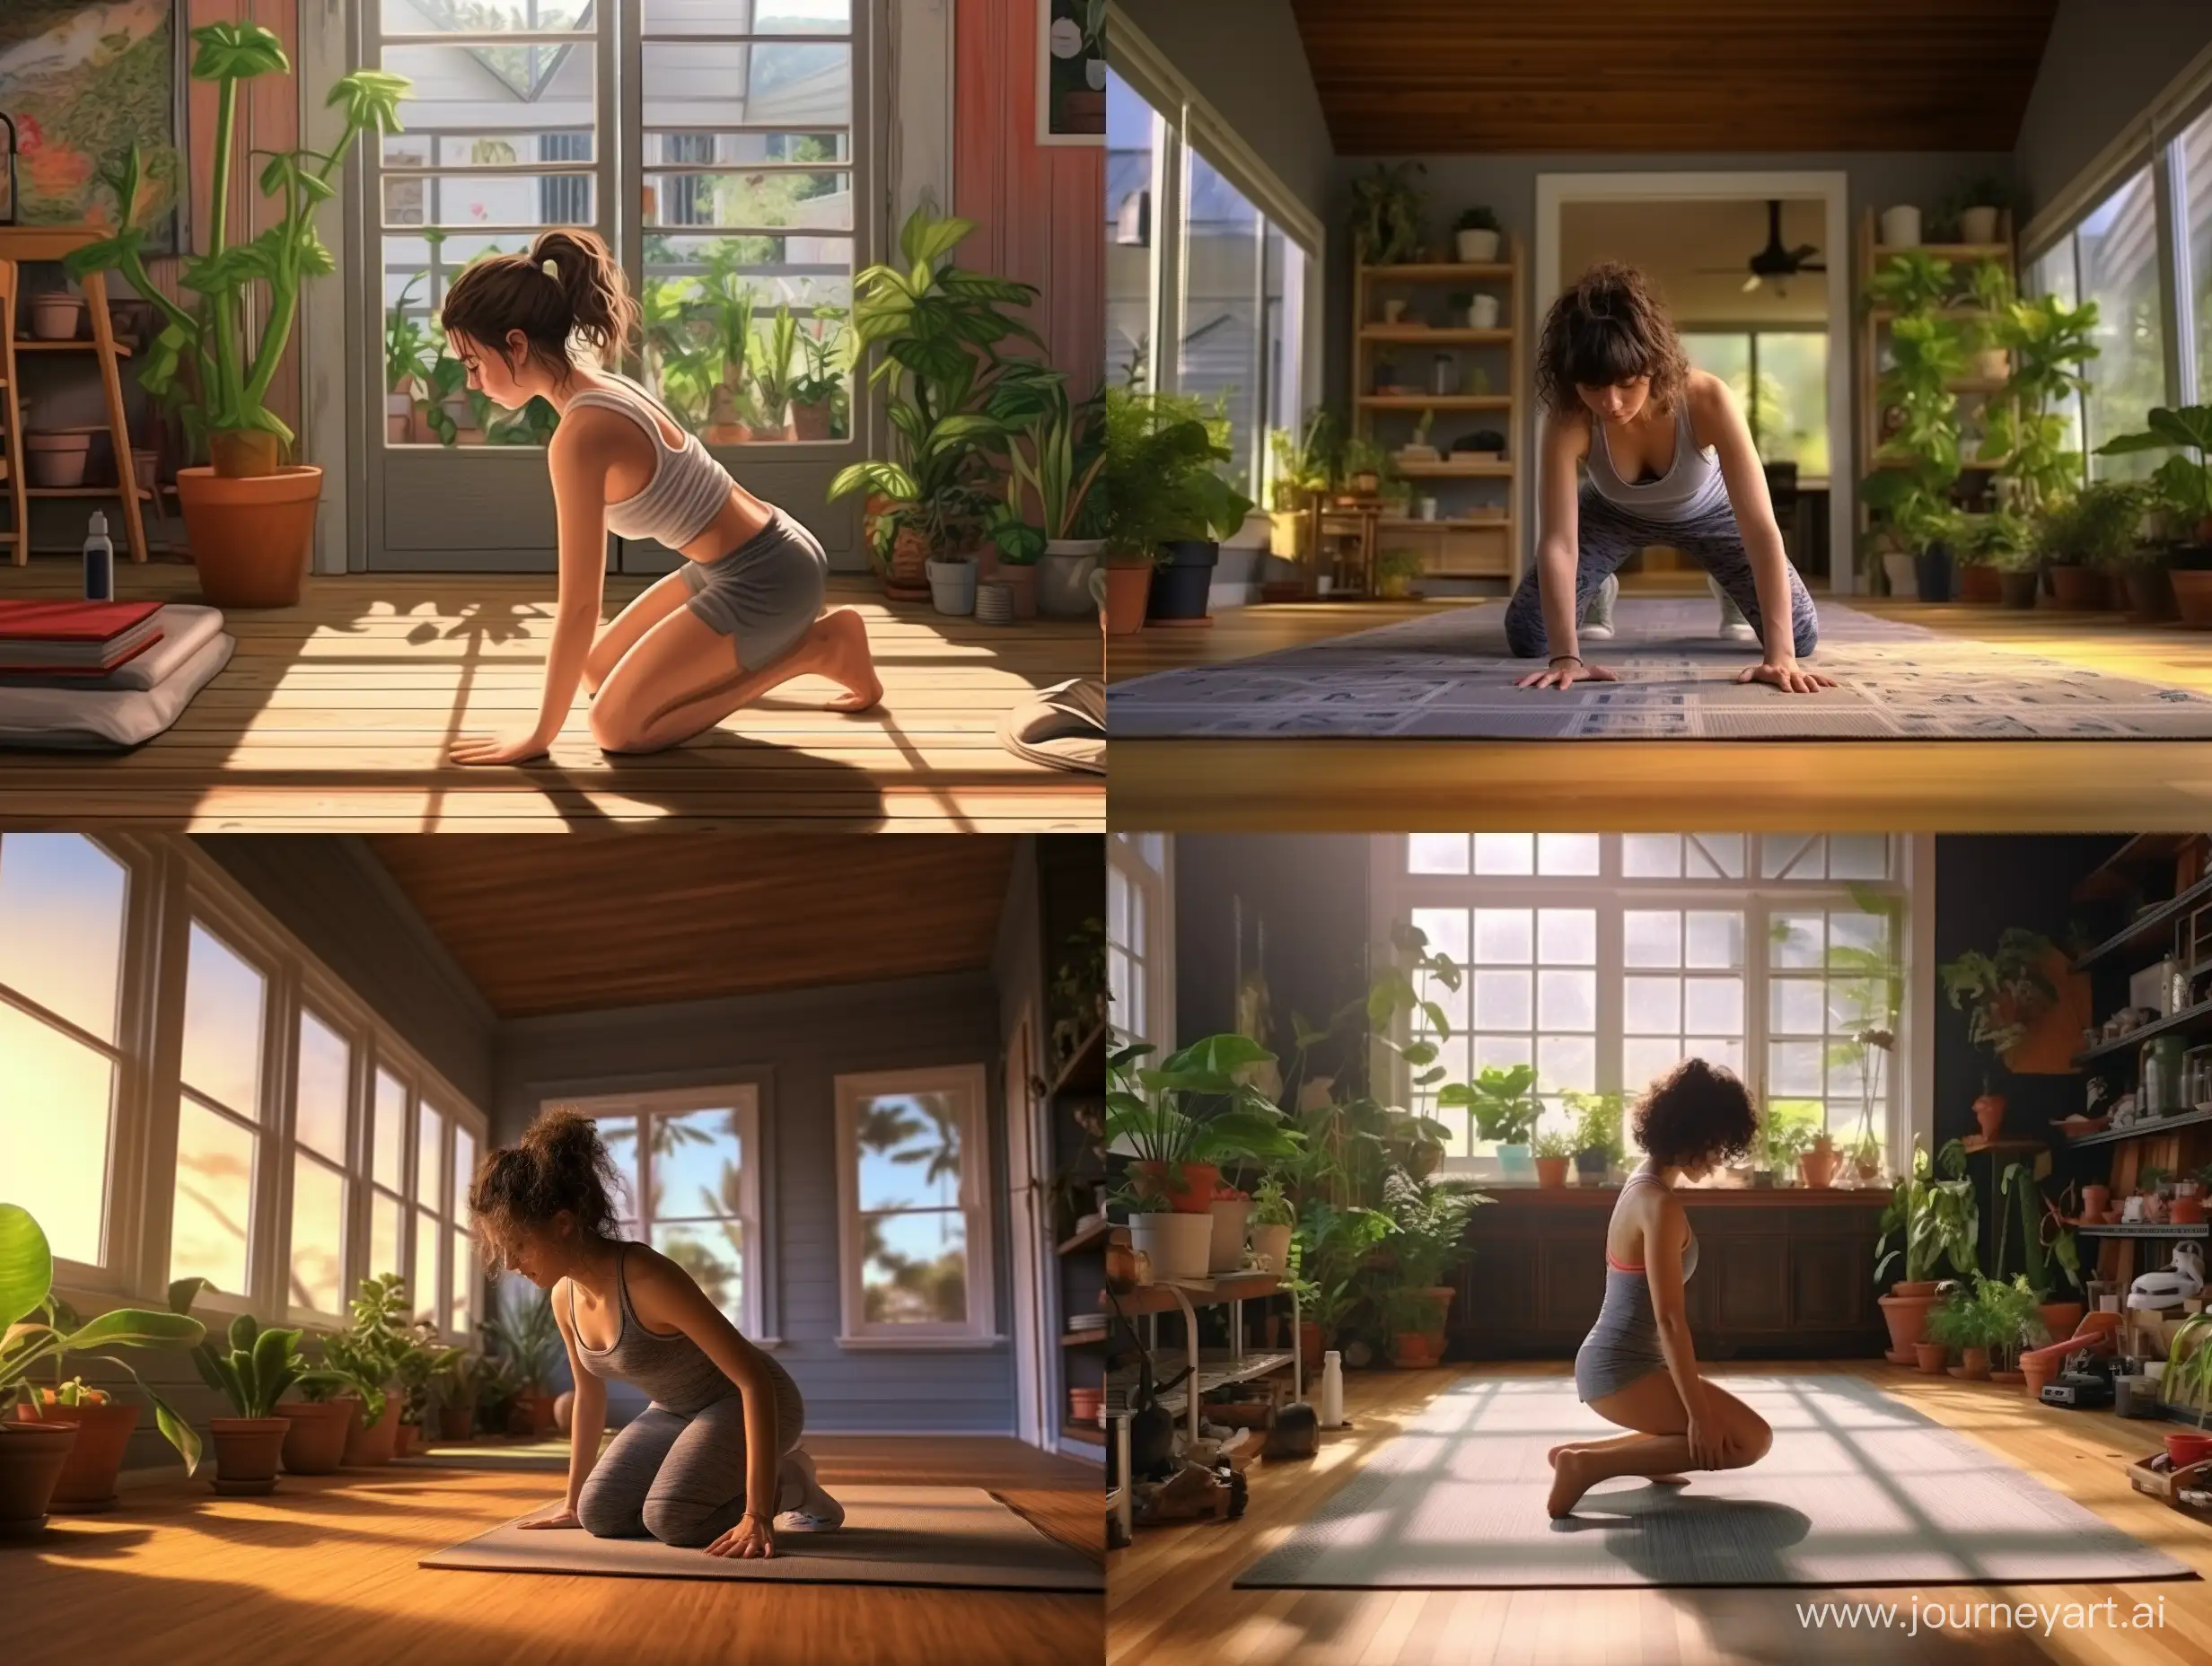 Young-Woman-Exercising-in-Serene-Home-Gym-with-Potted-Plants